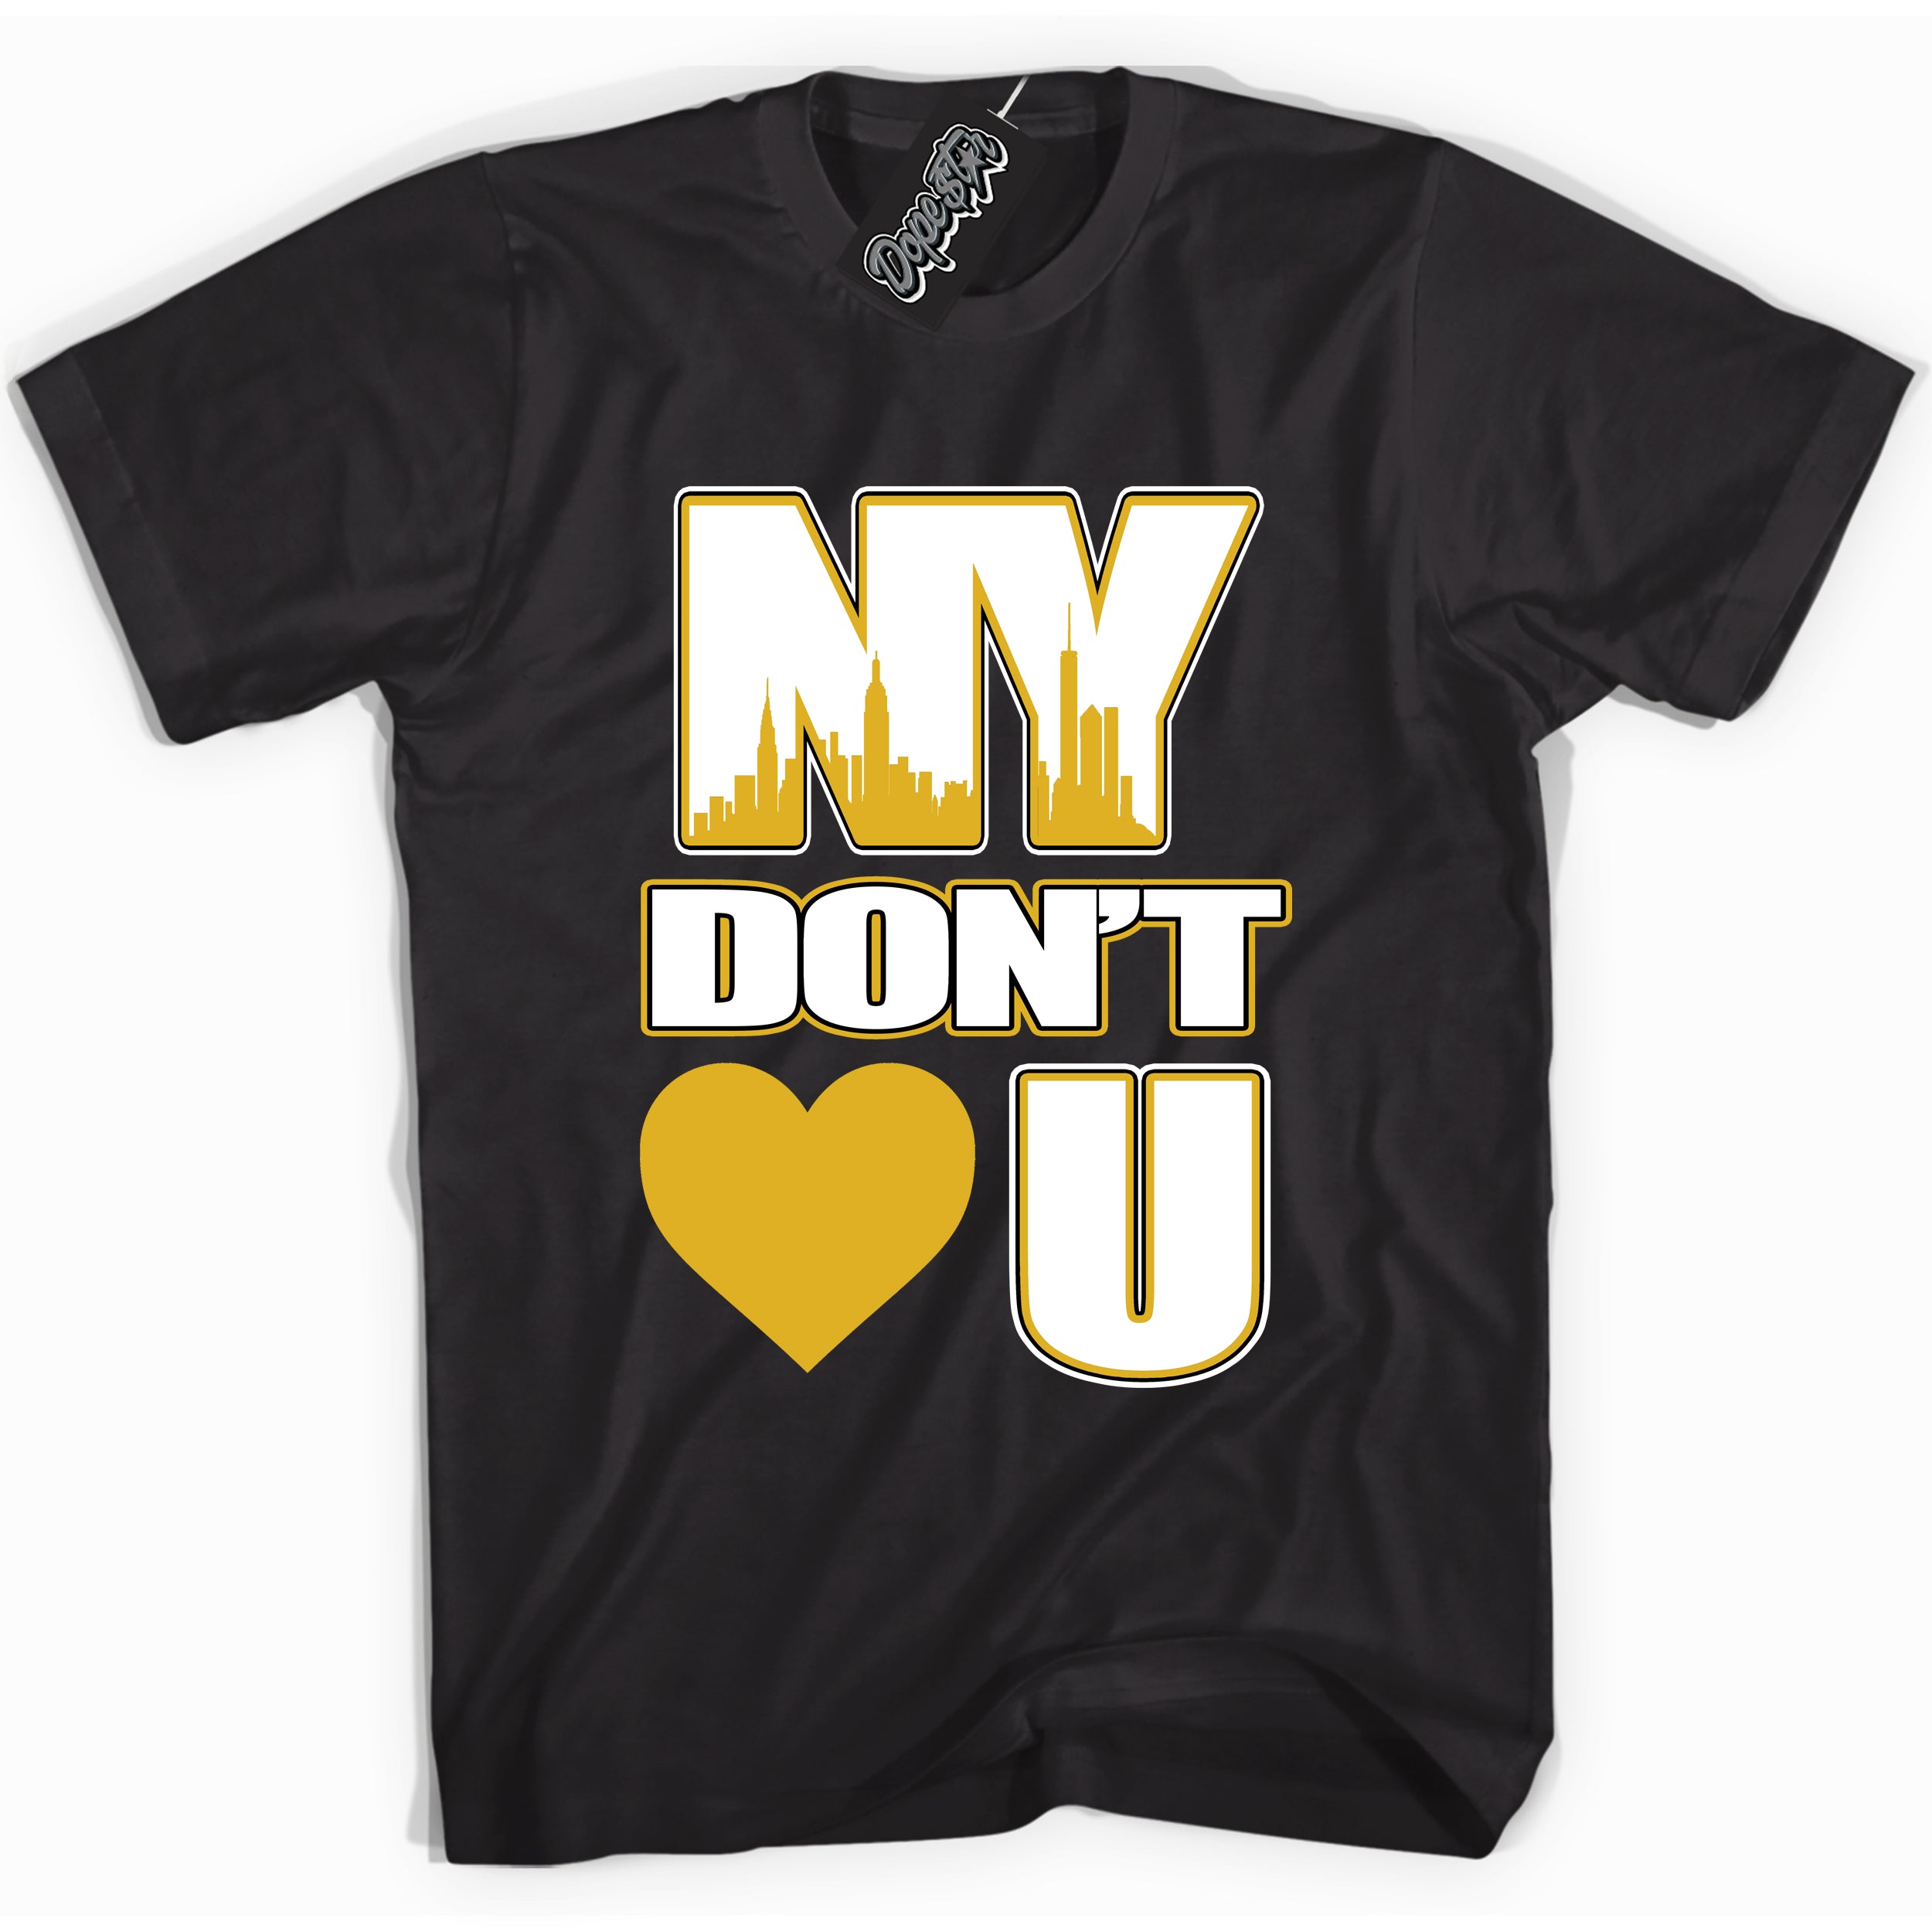 Cool Black Shirt with “ NY Don't Love You” design that perfectly matches Yellow Ochre 6s Sneakers.